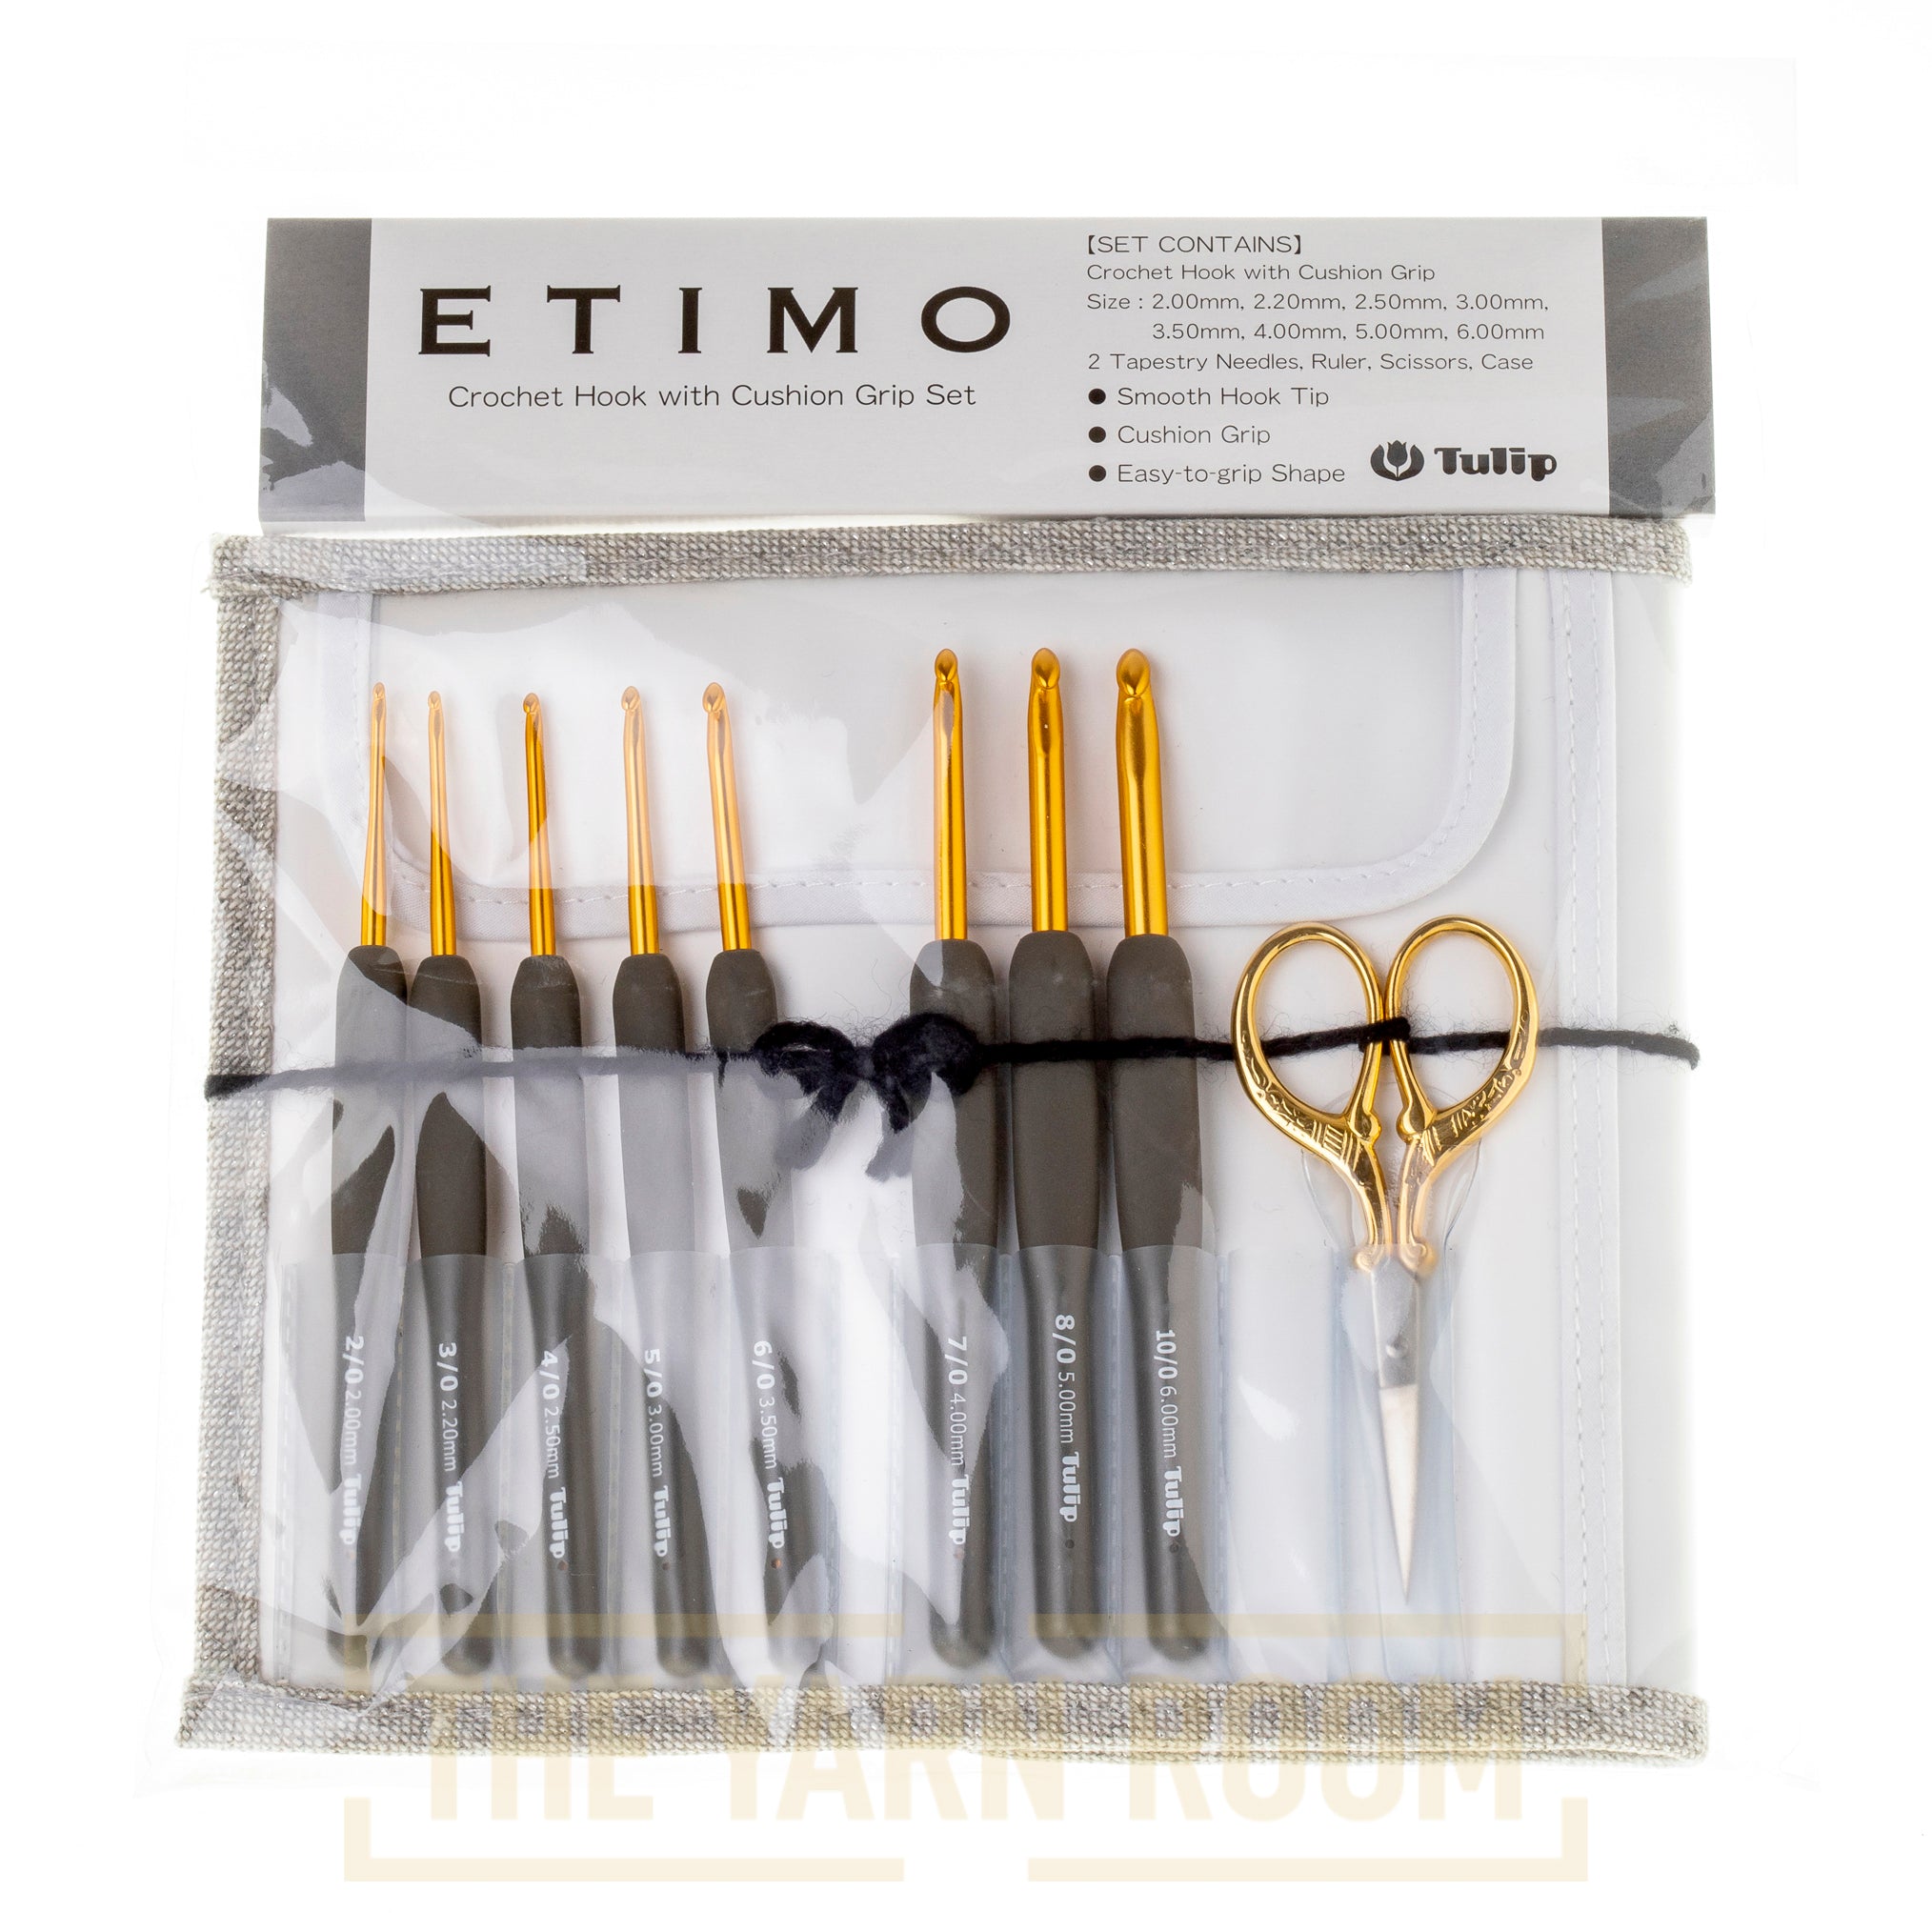 Tulip Etimo Crochet Hook with Cushion Grip : Size H-8 (5.00mm) 